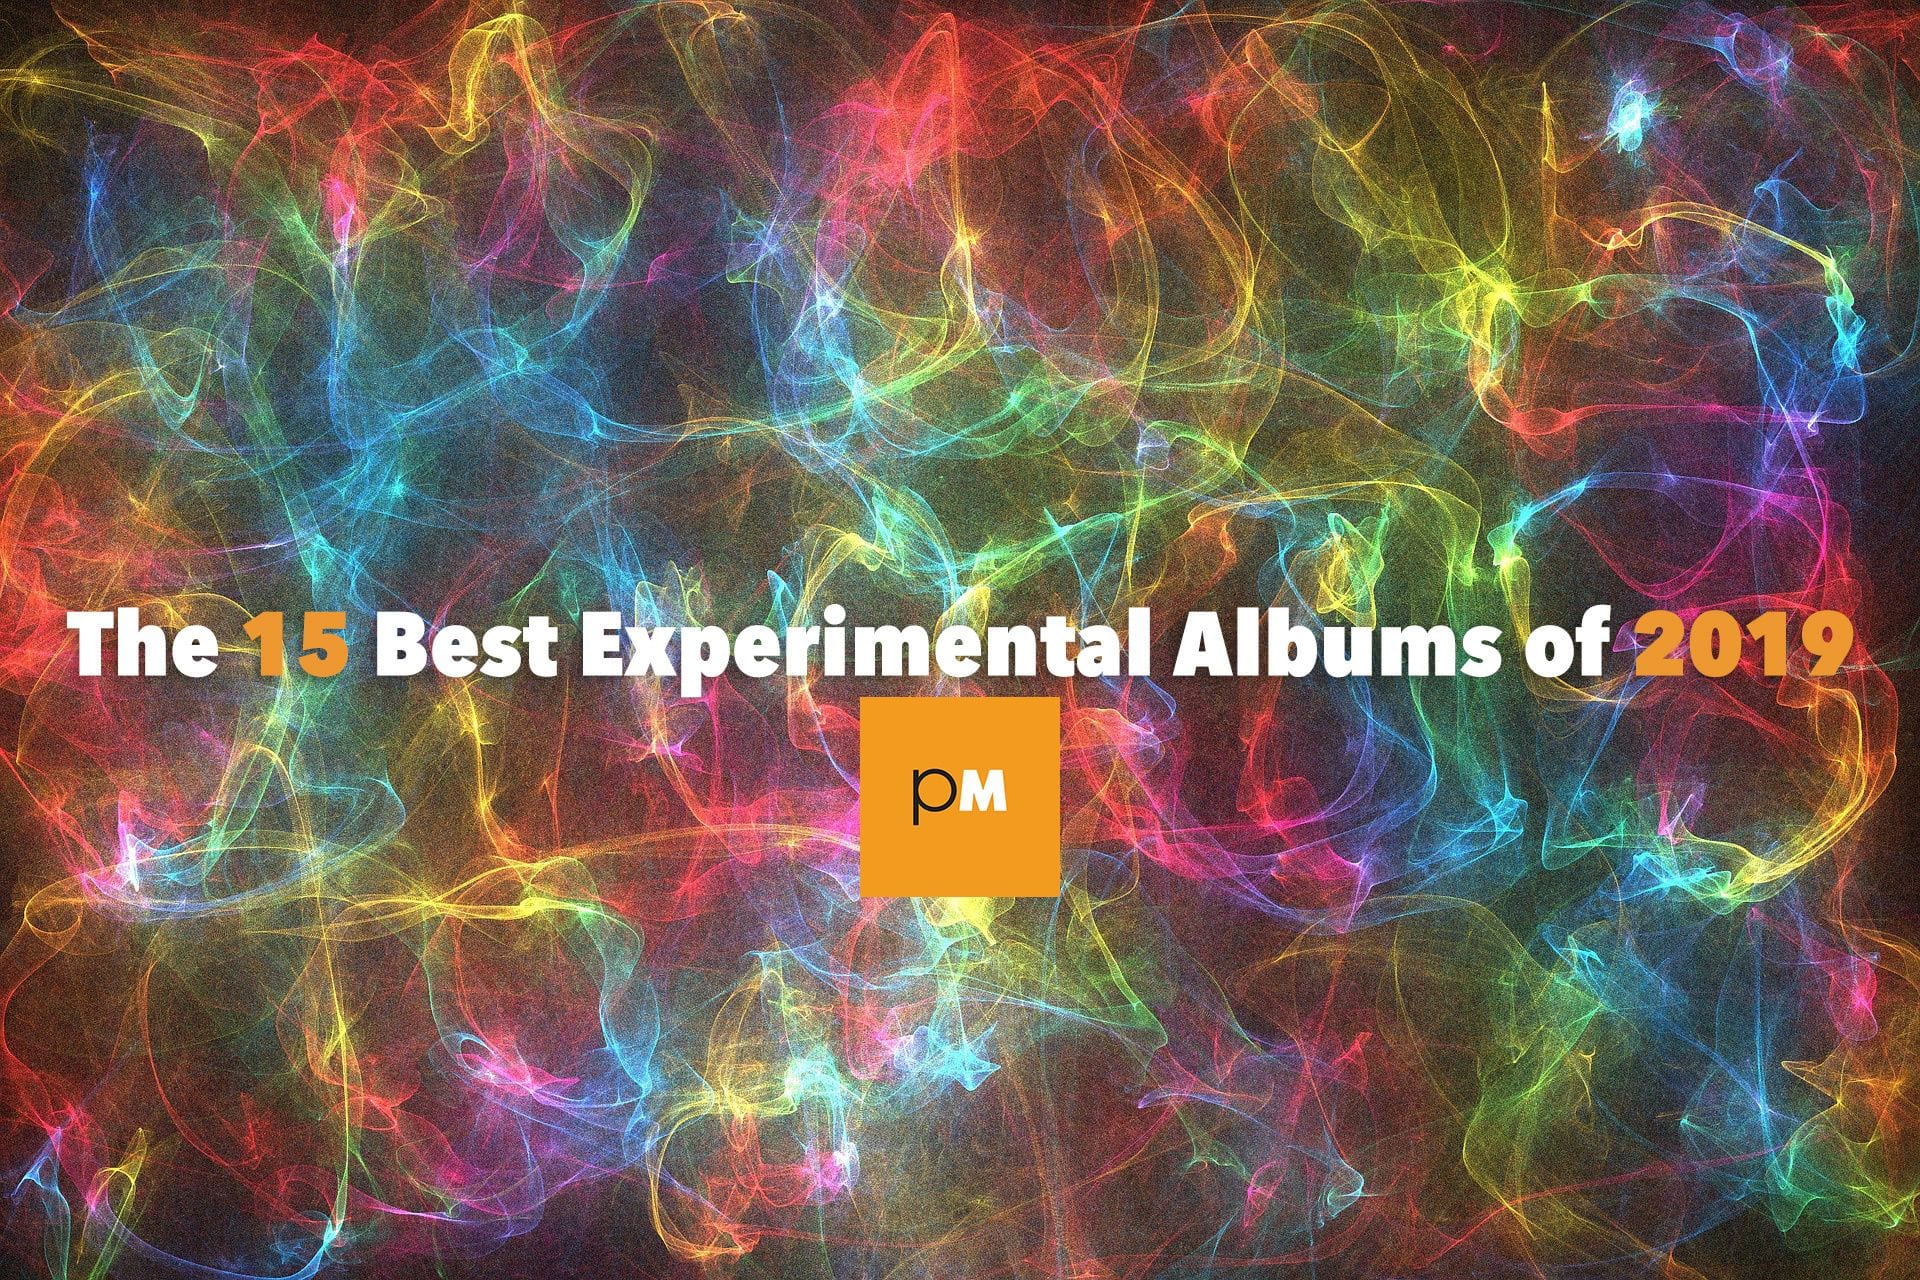 The 15 Best Experimental Albums of 2019